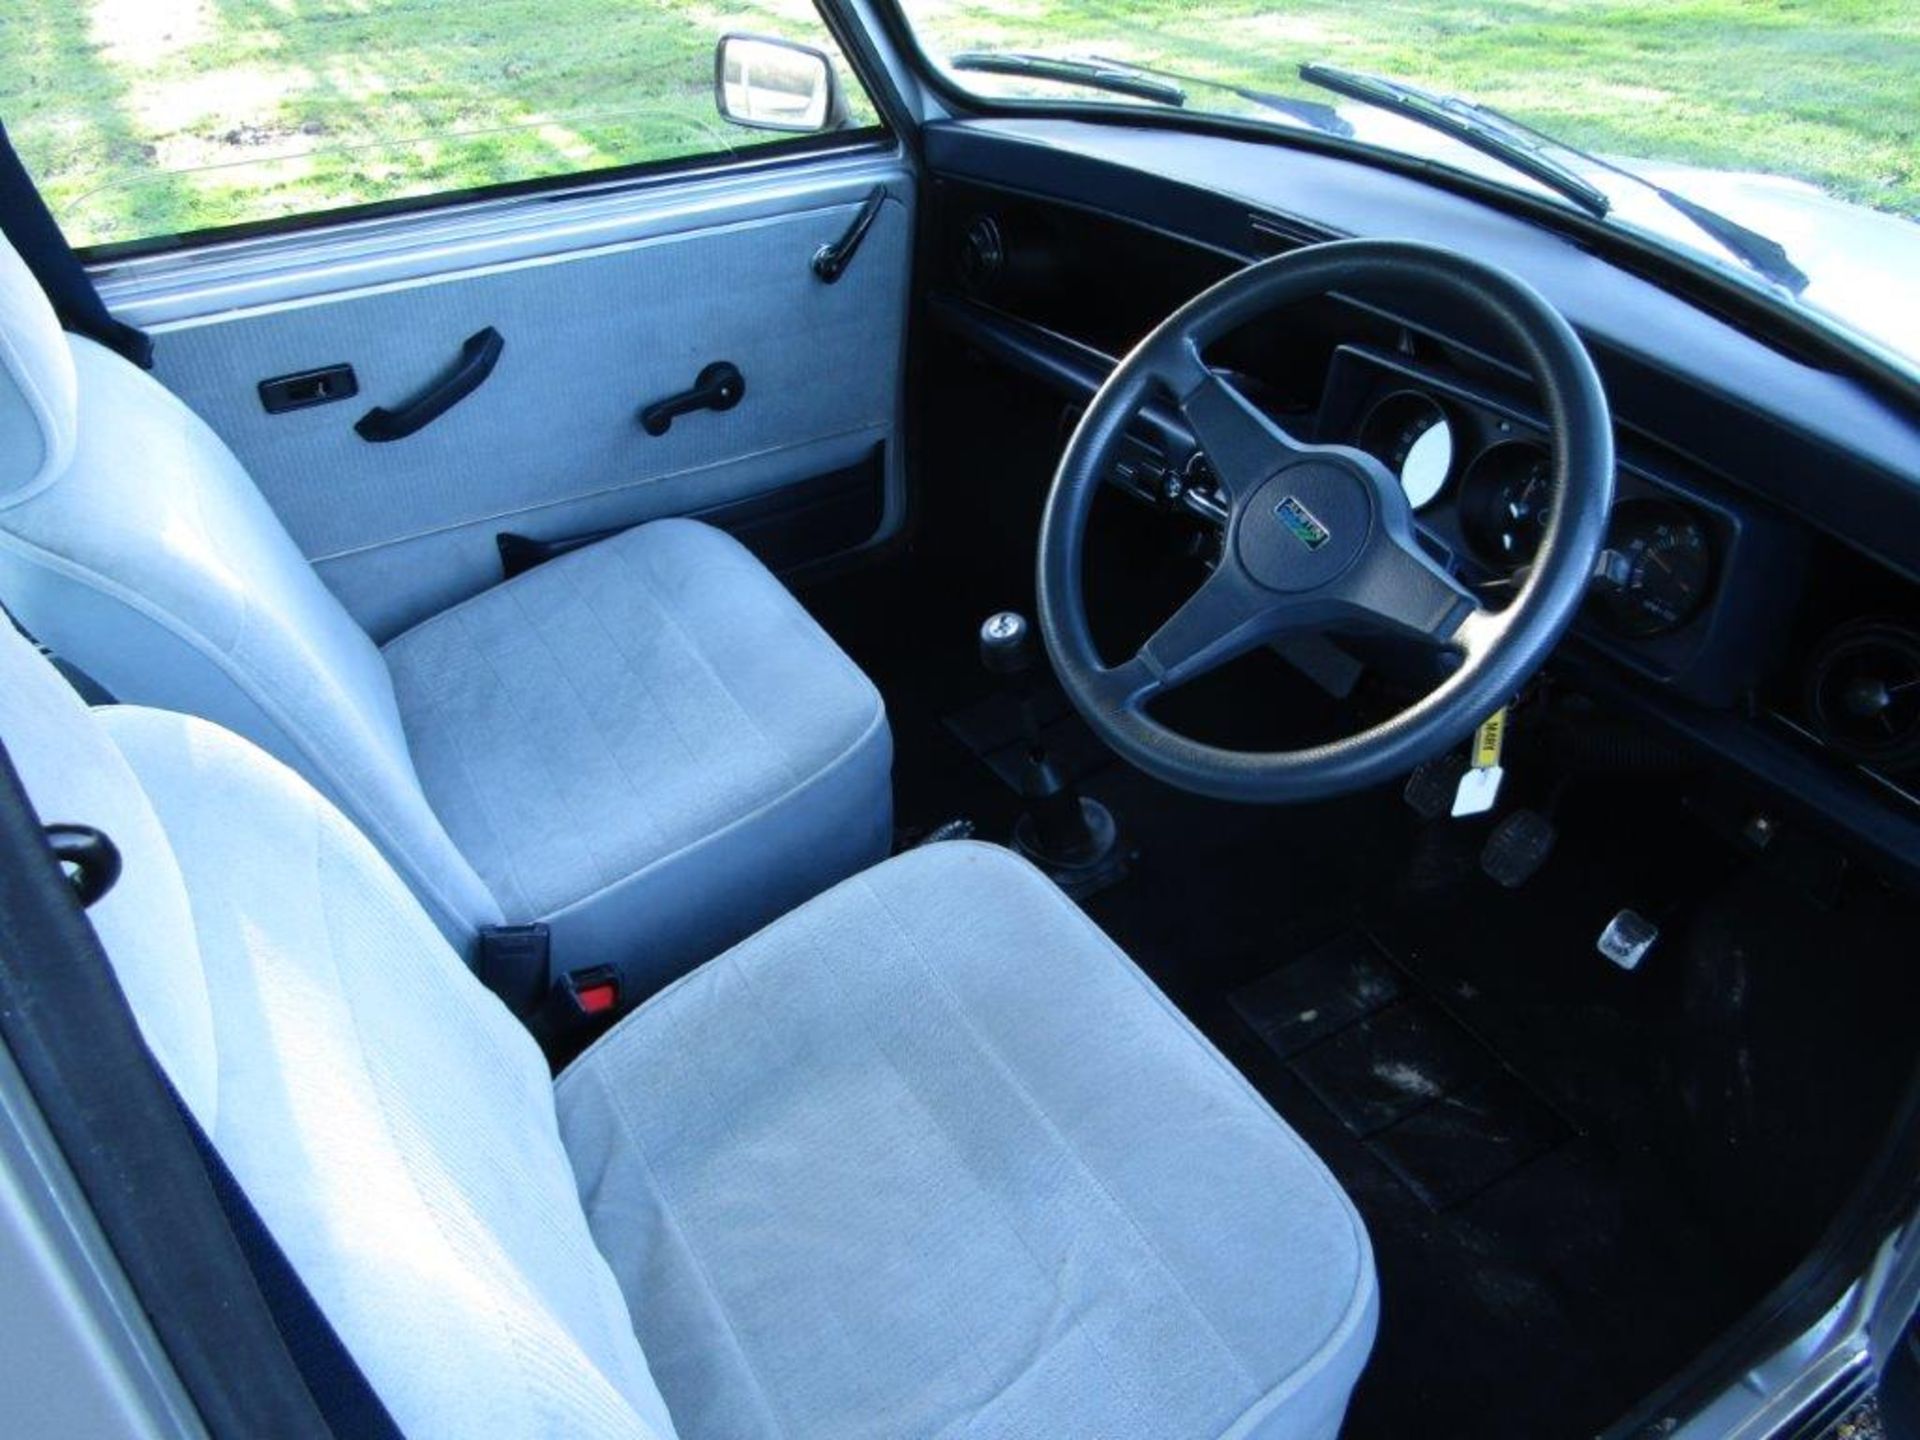 1986 Austin Mini 1000 Mayfair 7,909 miles from new - Image 9 of 11